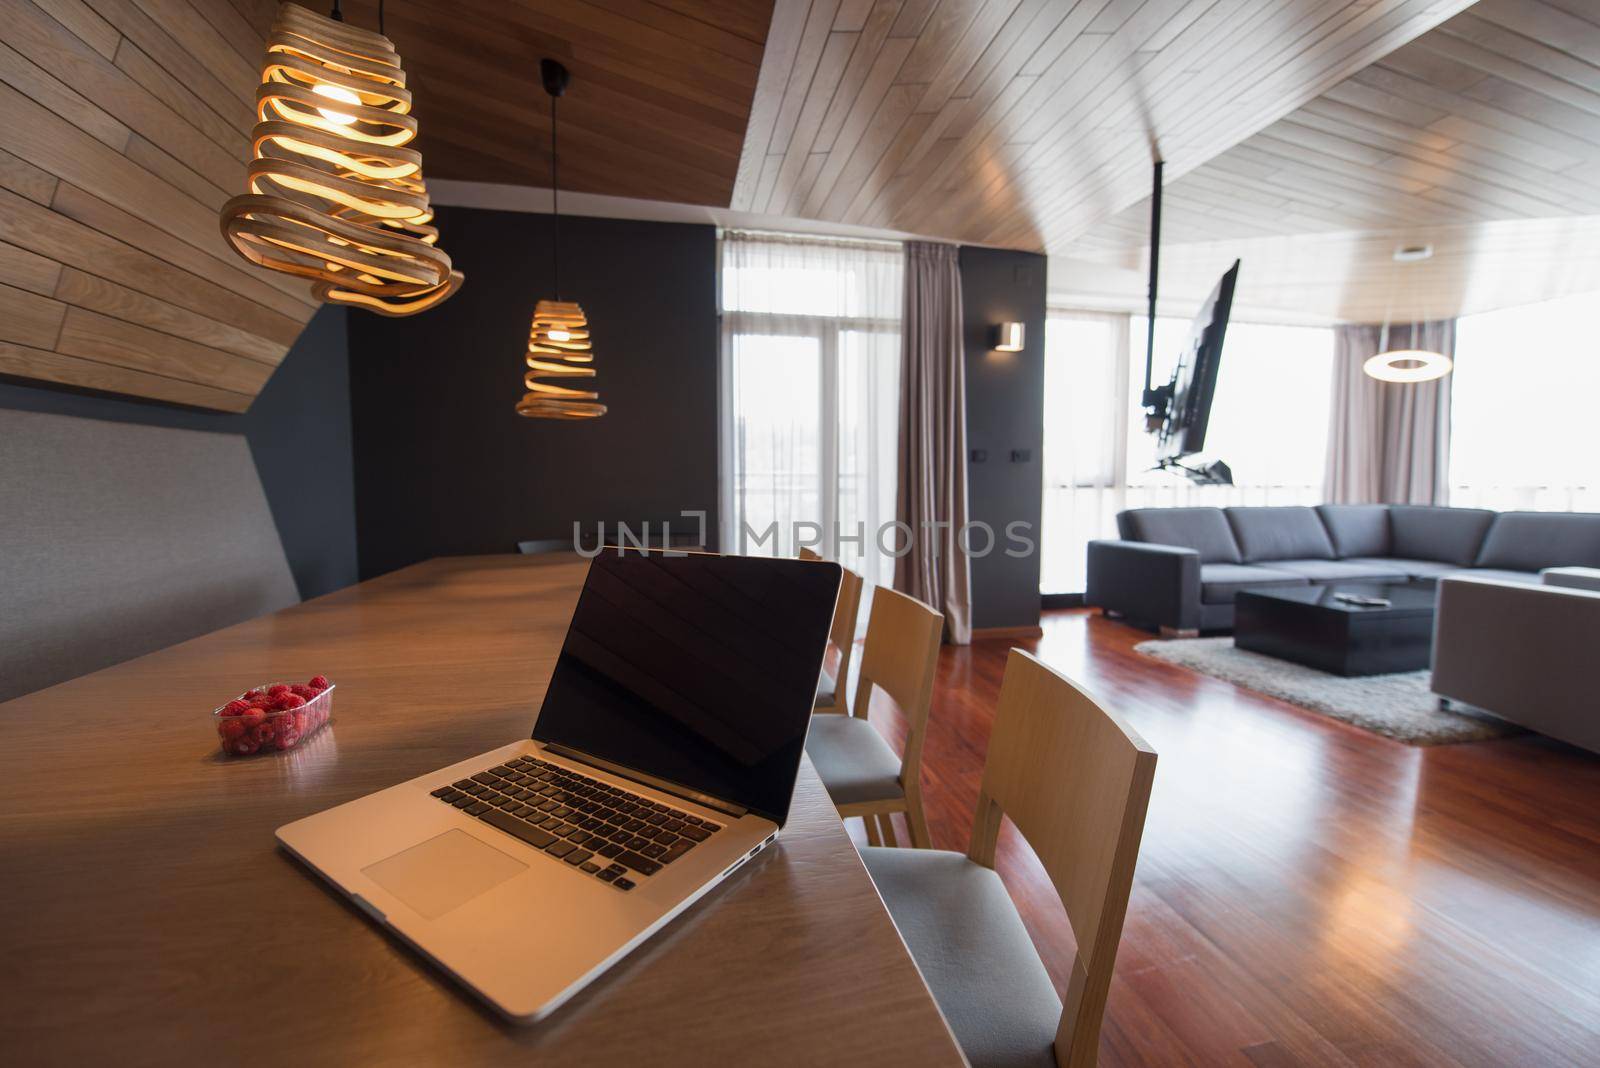 Notebook with blank screen on table in luxury living room.